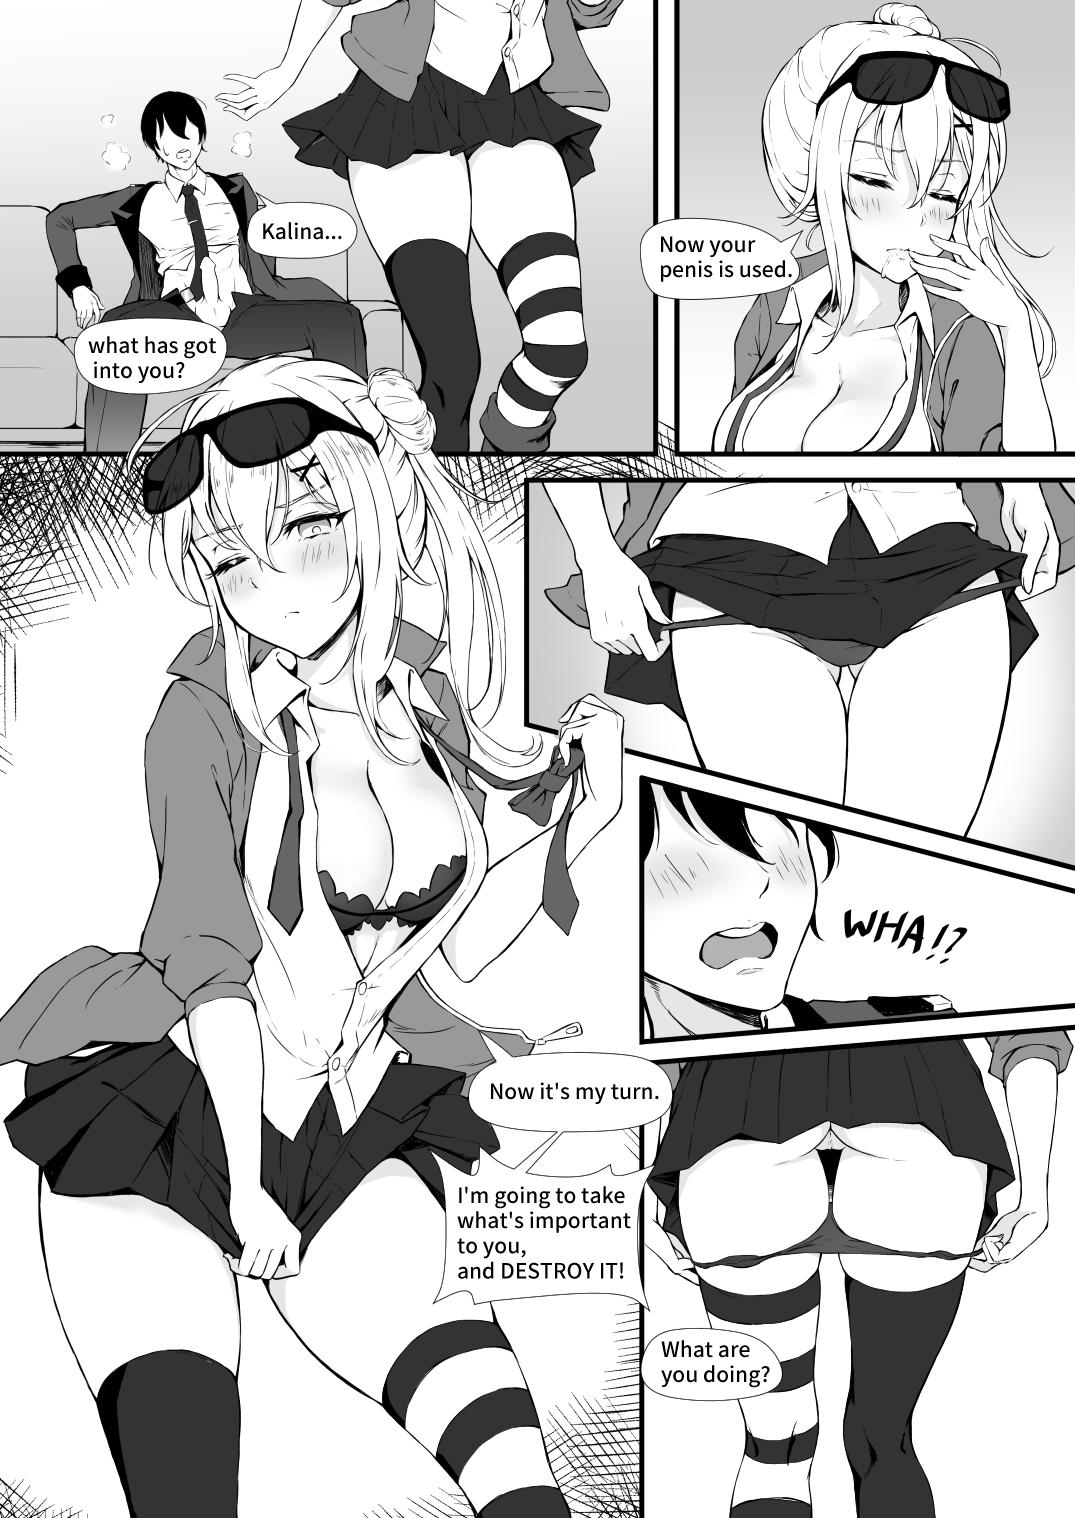 Stretch How Many Diamonds a Kiss Worth? - Girls frontline Homemade - Page 13